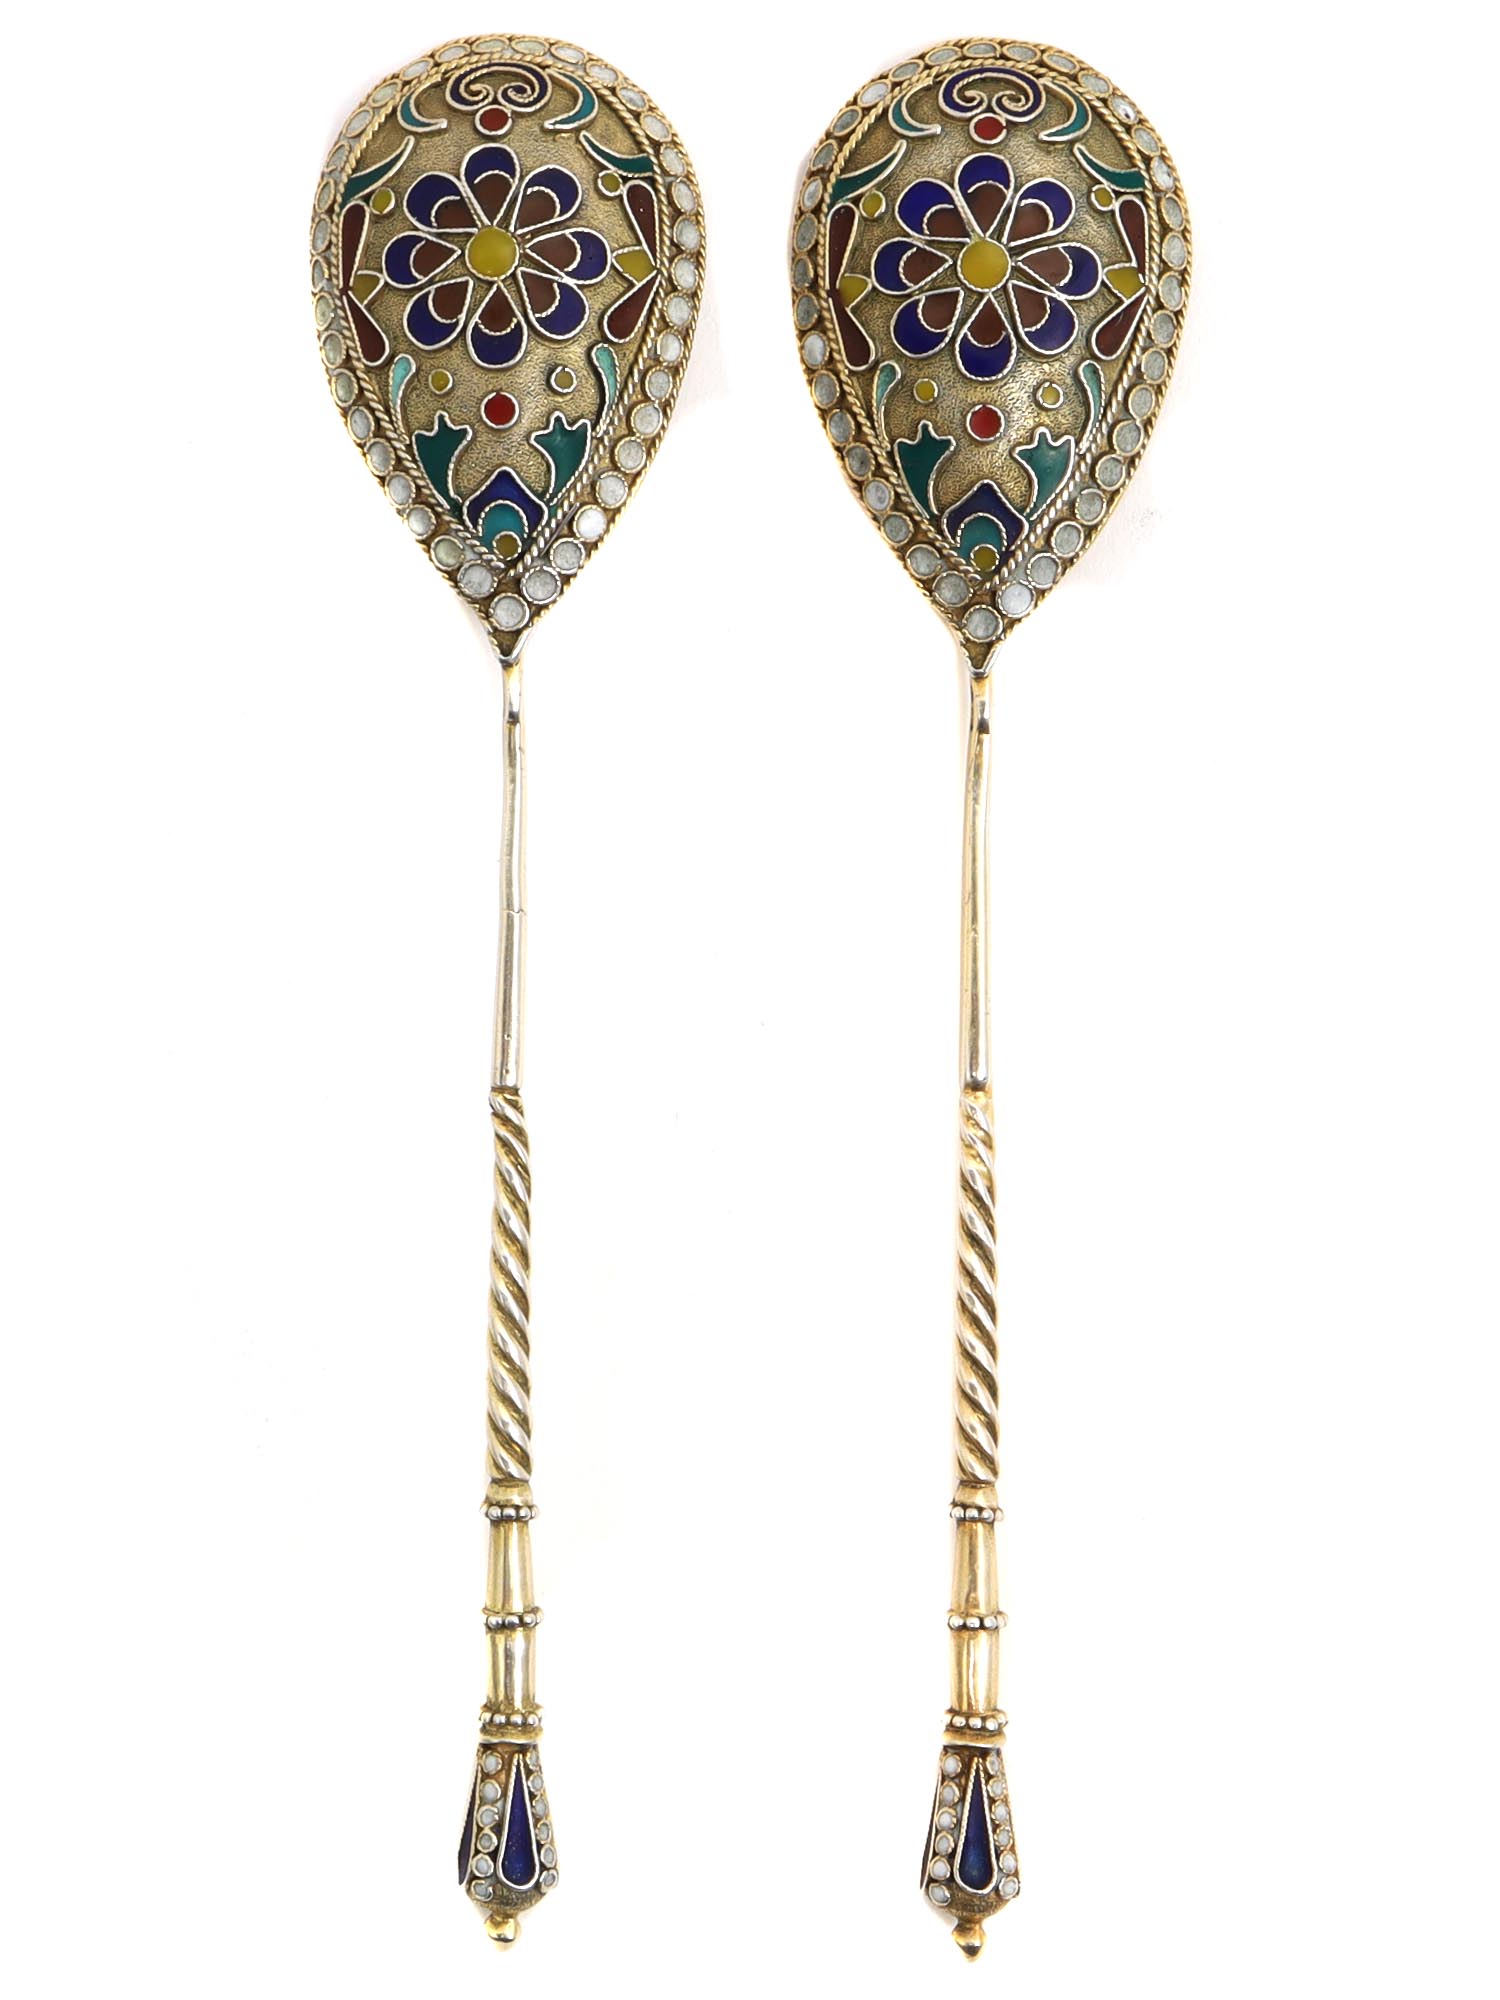 A PAIR OF RUSSIAN SILVER GILT CLOISONNE ENAMEL SPOONS PIC-0